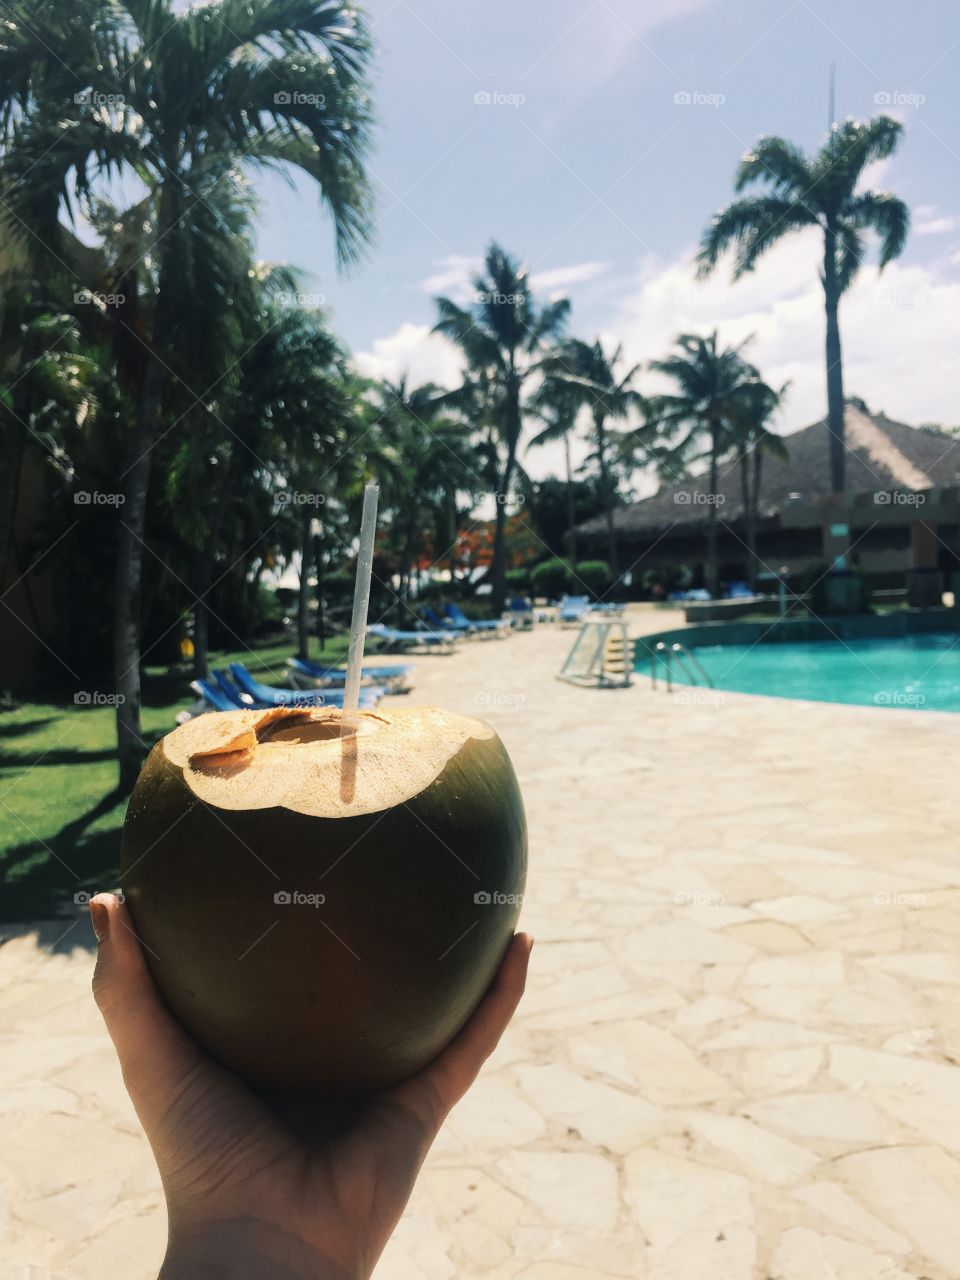 Coconut in the Carribean